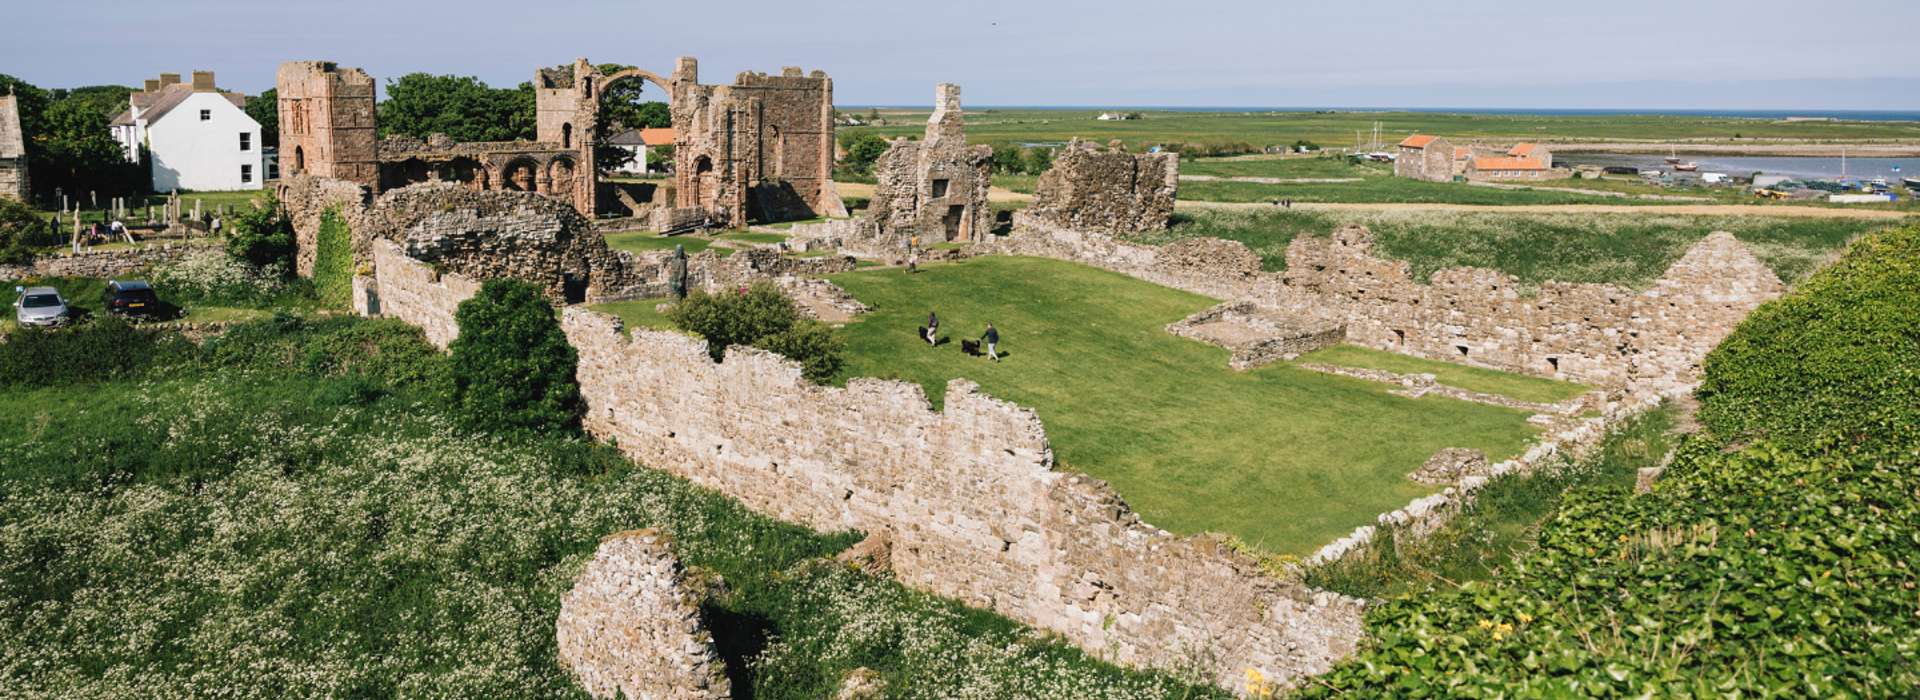 More families than ever are visiting historic sites, says English Heritage